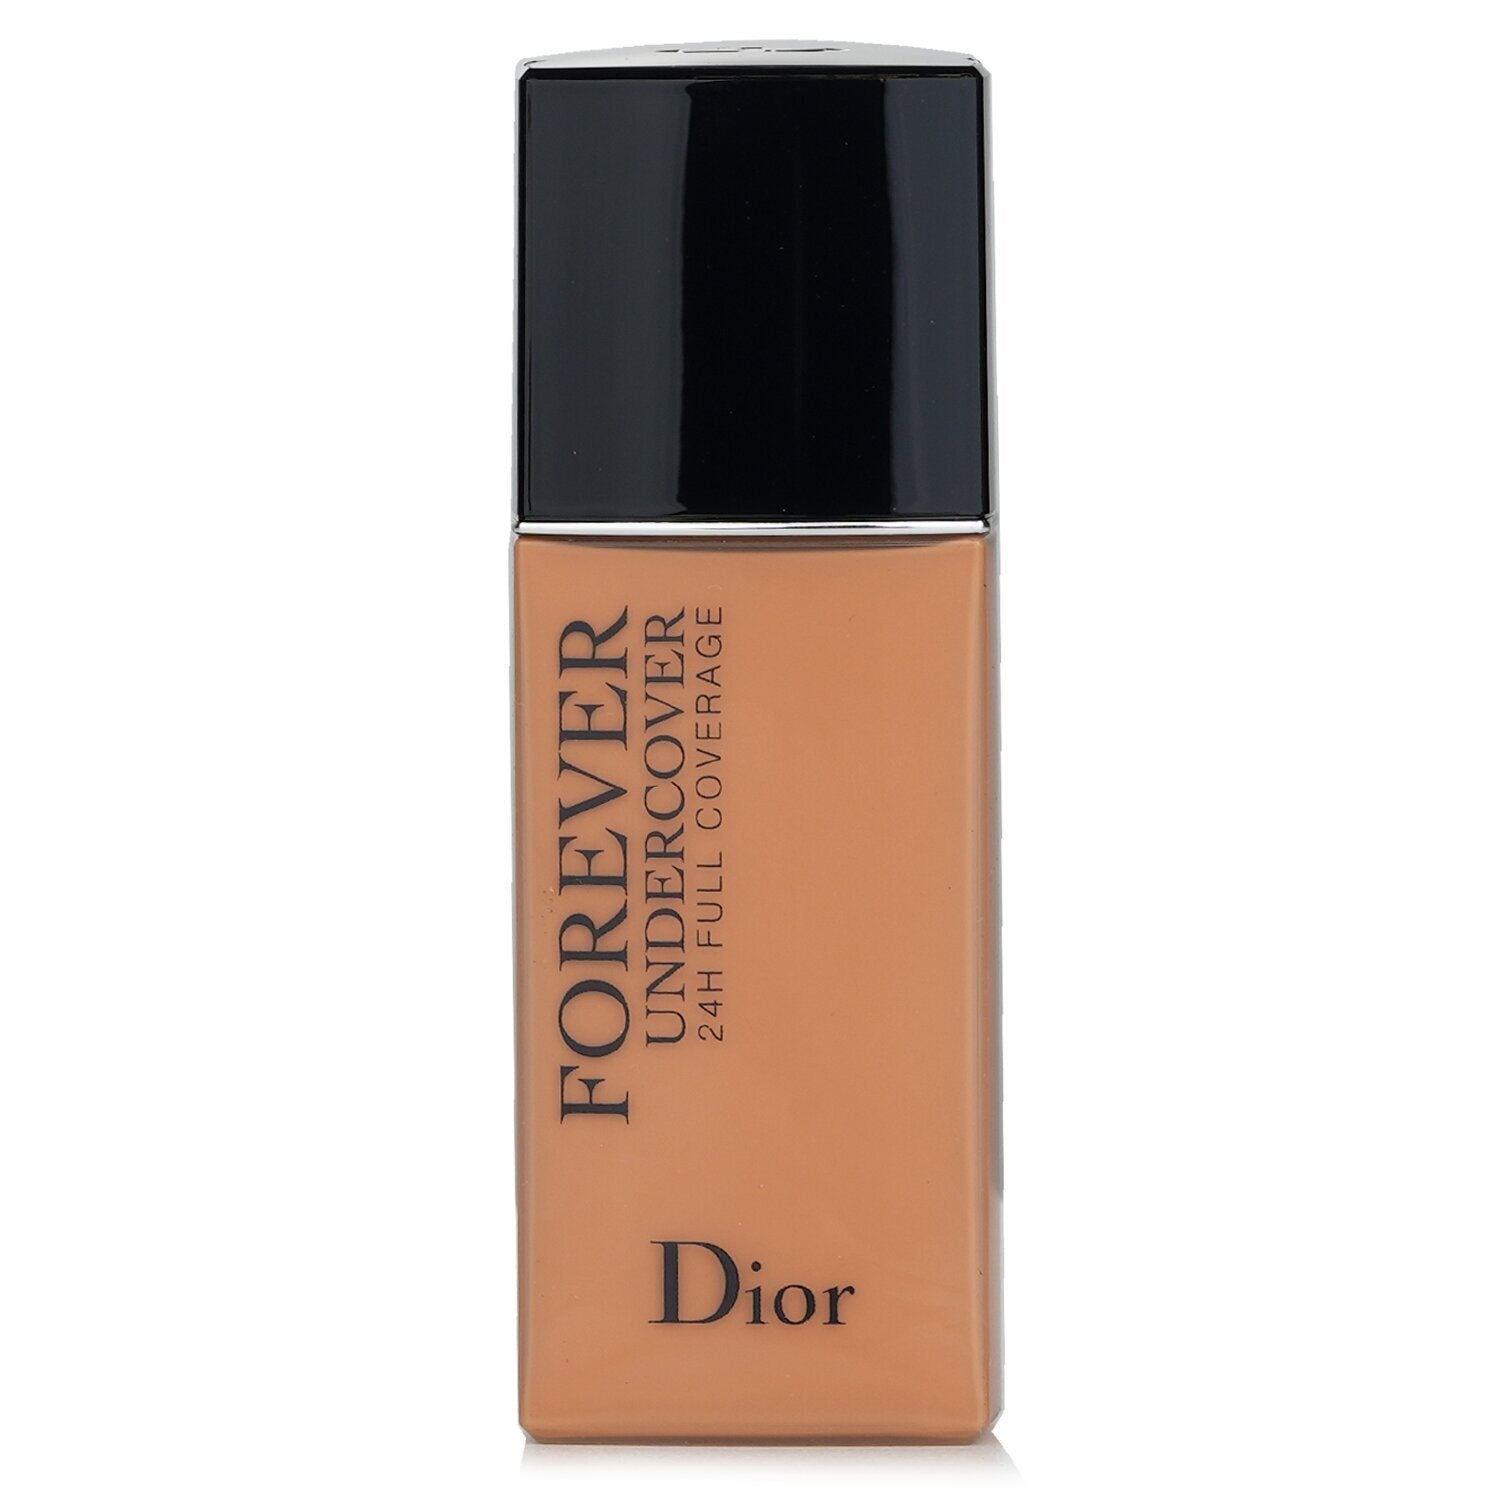 CHRISTIAN DIOR - Diorskin Forever Undercover 24H Wear Full Coverage Water Based Foundation - # 040 Honey Beige C000900040 / 383639 40ml/1.3oz - lolaluxeshop